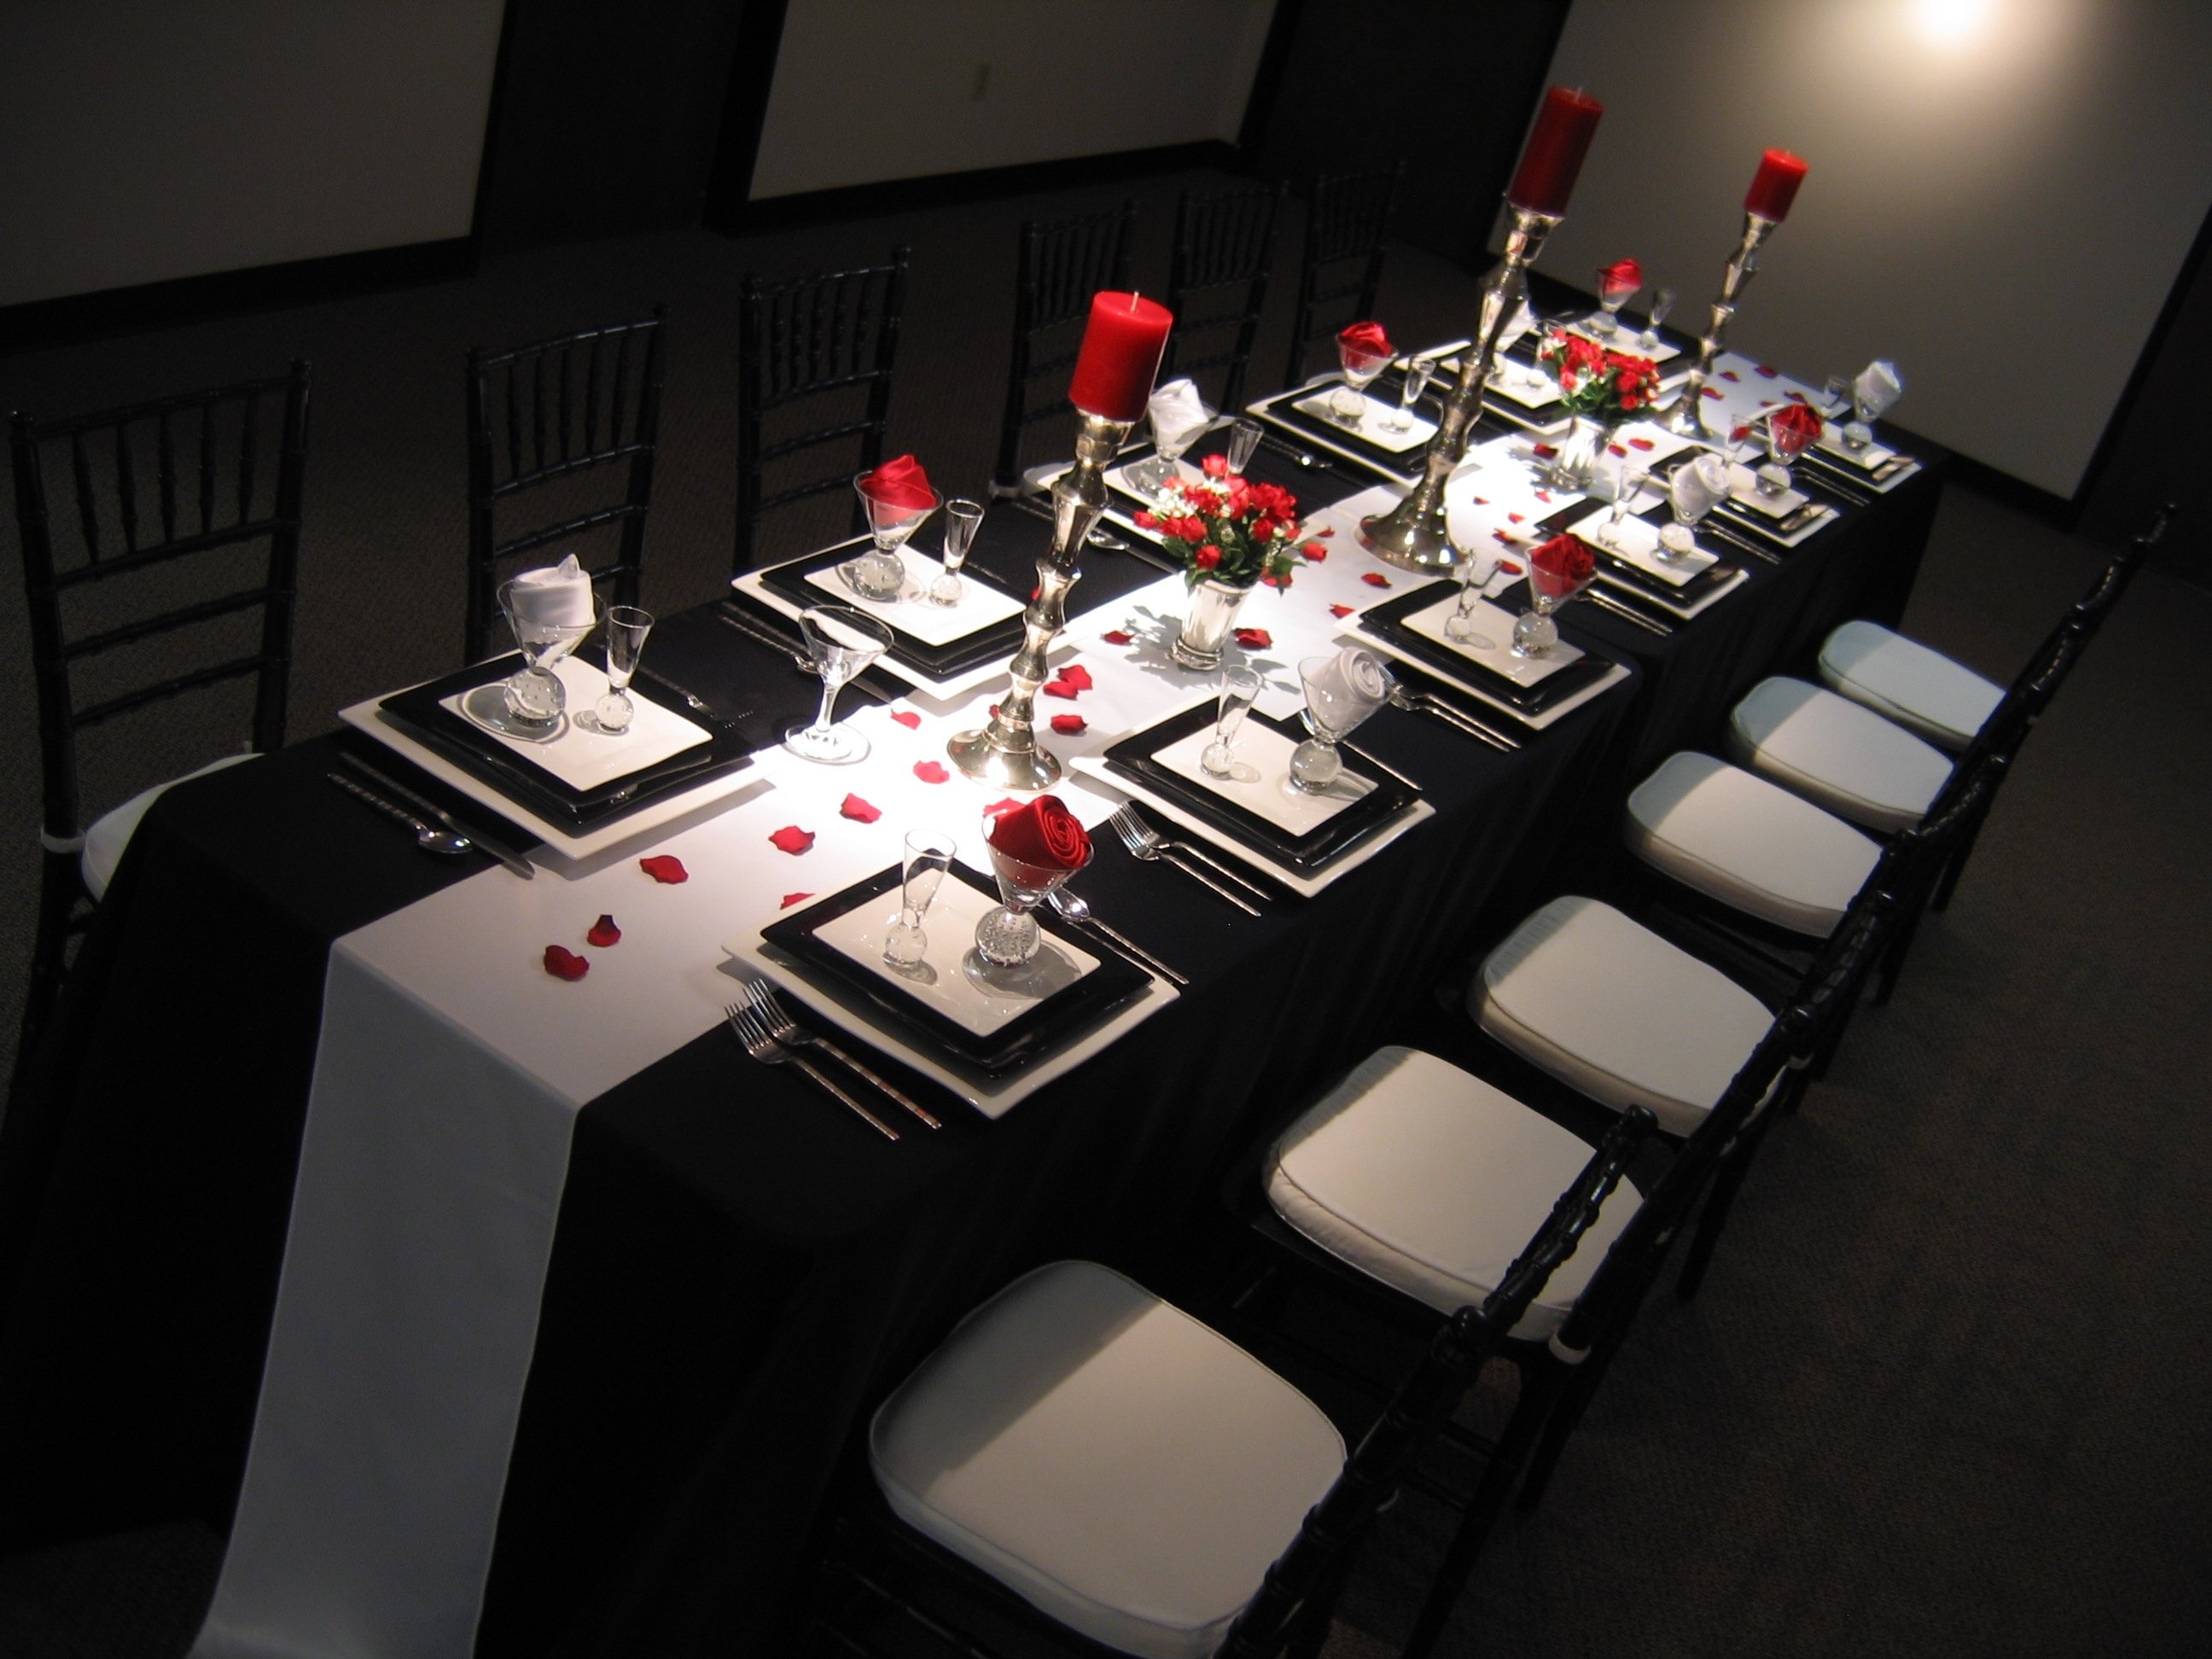 10 Nice Black White And Red Wedding Ideas 55 black white and red table settings reception red black damask 2022